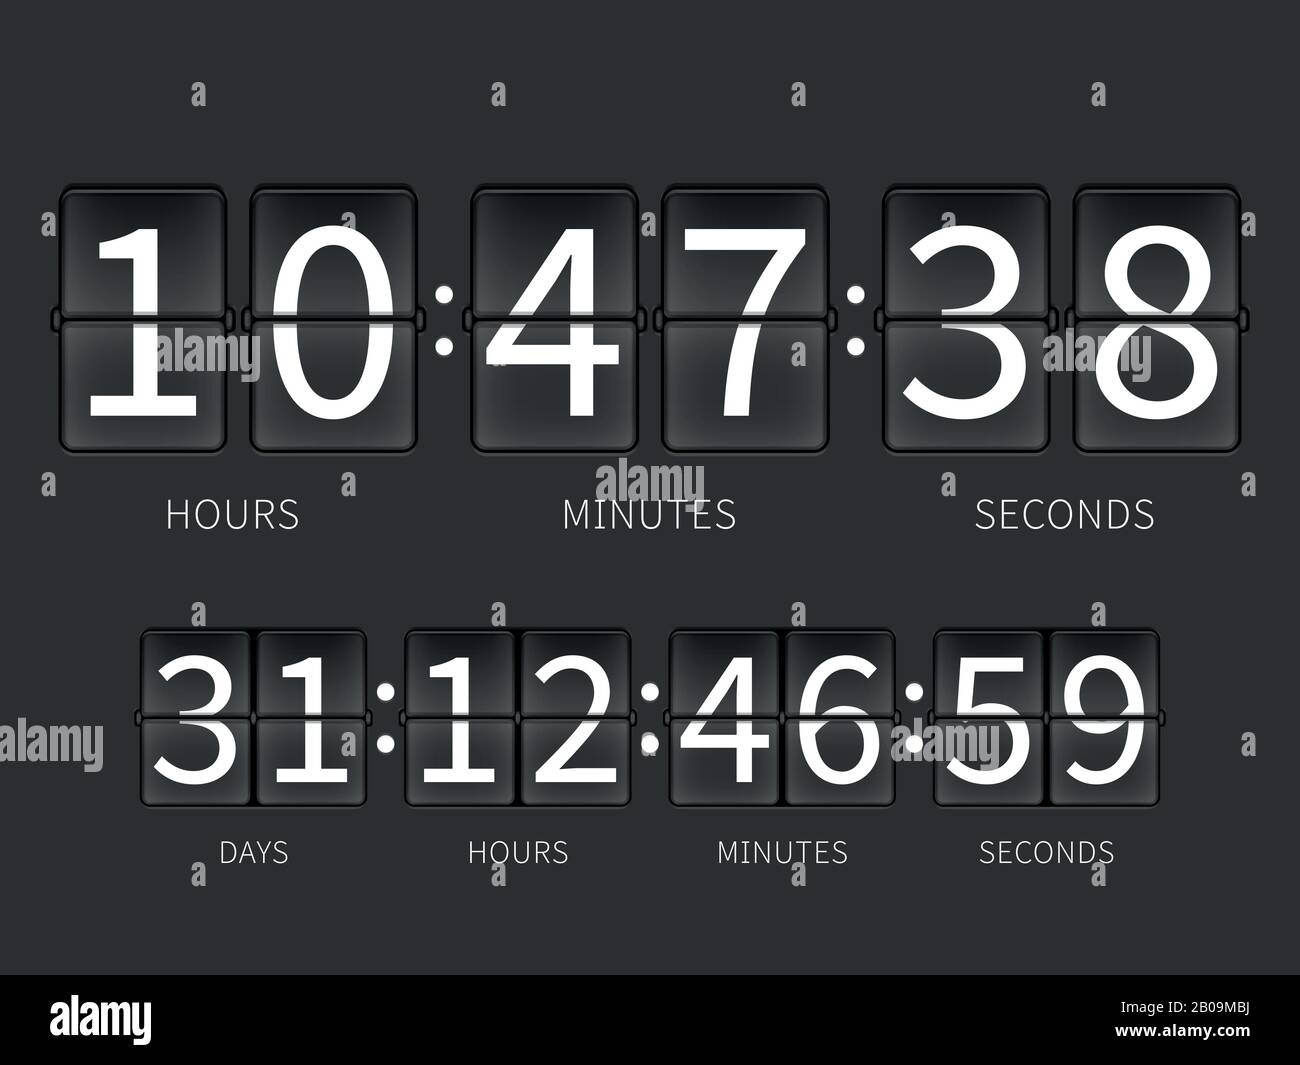 https://c8.alamy.com/comp/2B09MBJ/flip-countdown-timer-hourly-schedule-vector-time-panel-for-airport-illustration-of-flip-timer-with-days-and-hours-2B09MBJ.jpg